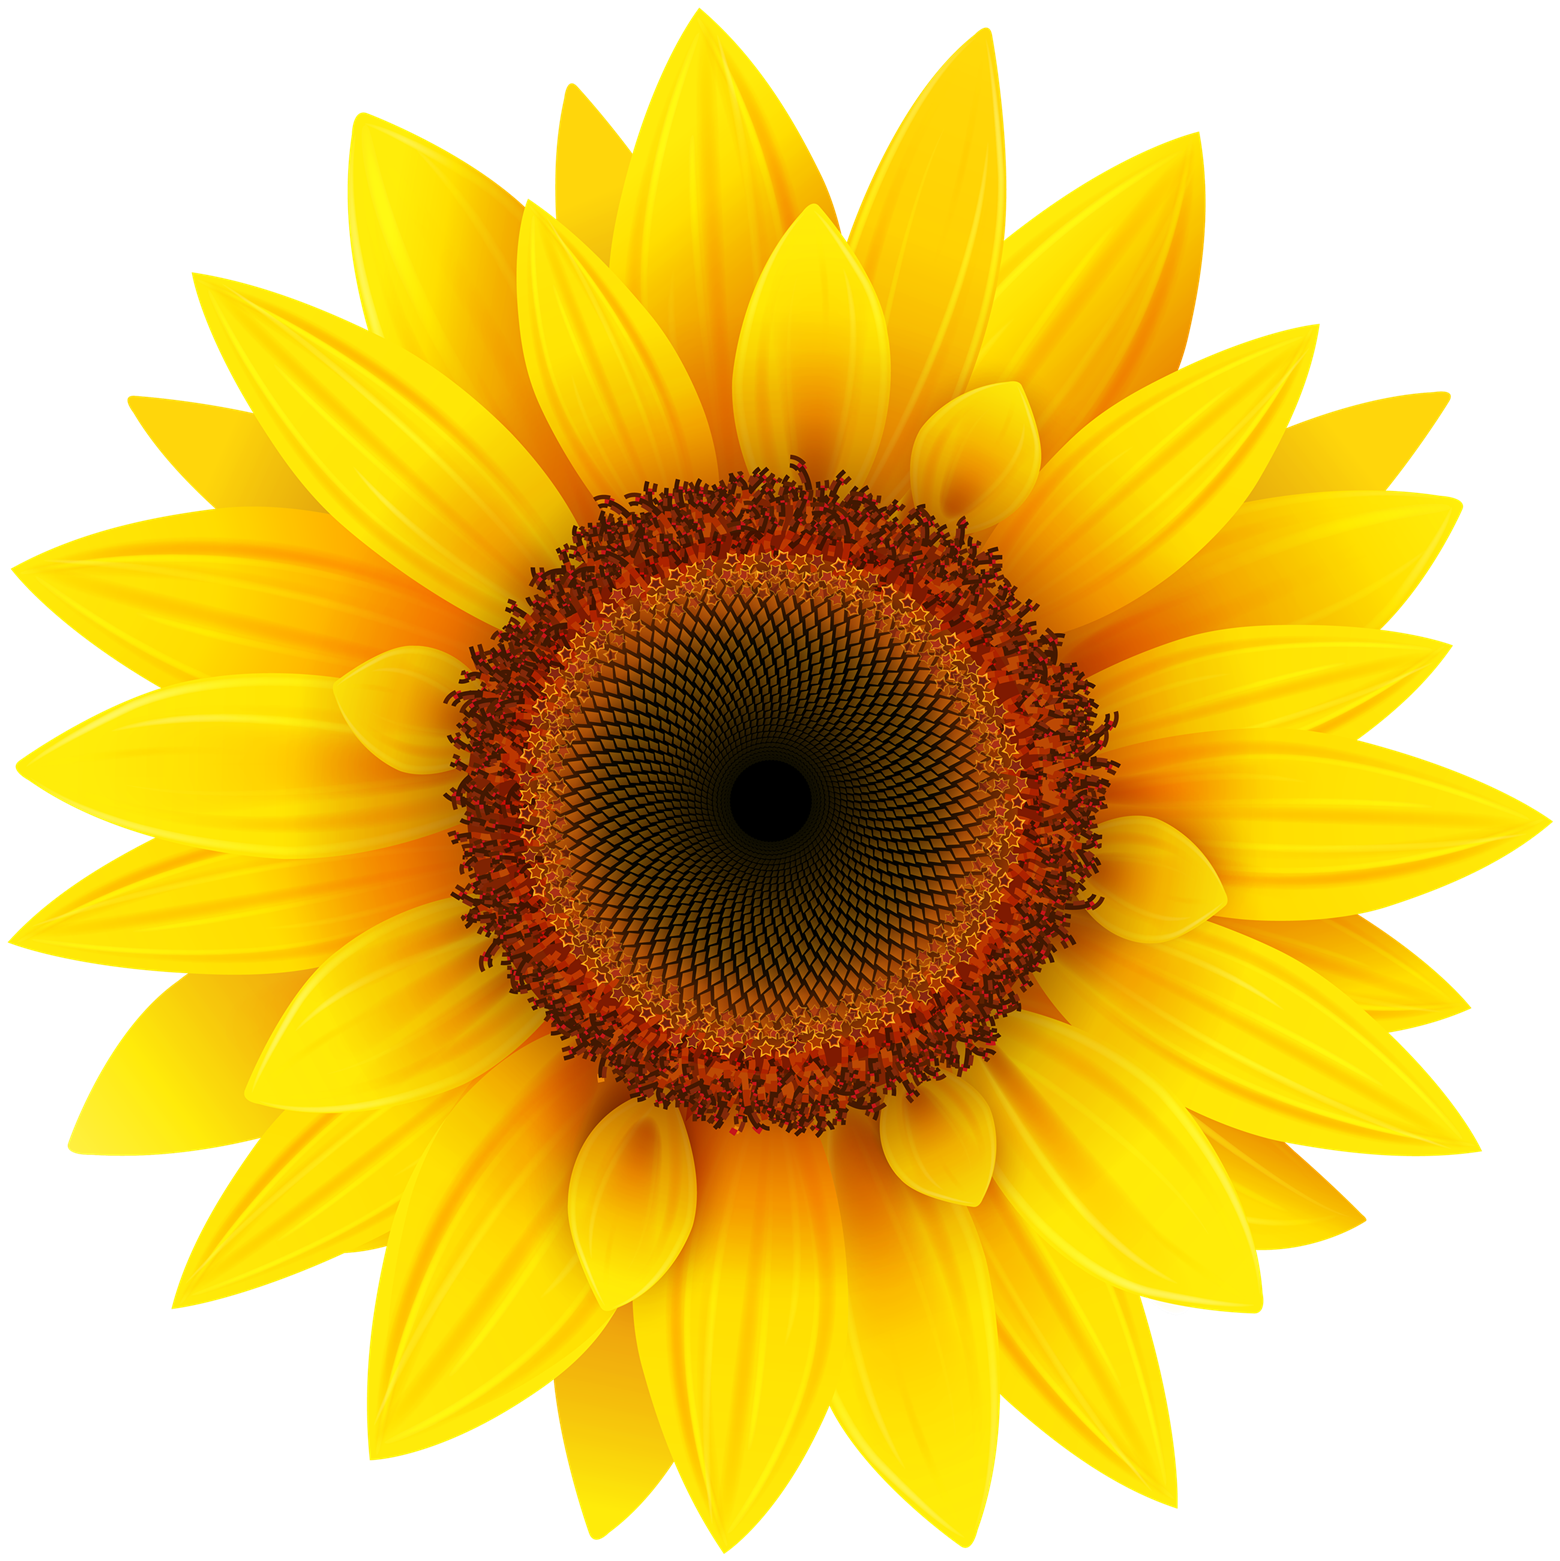 sunflower images free download